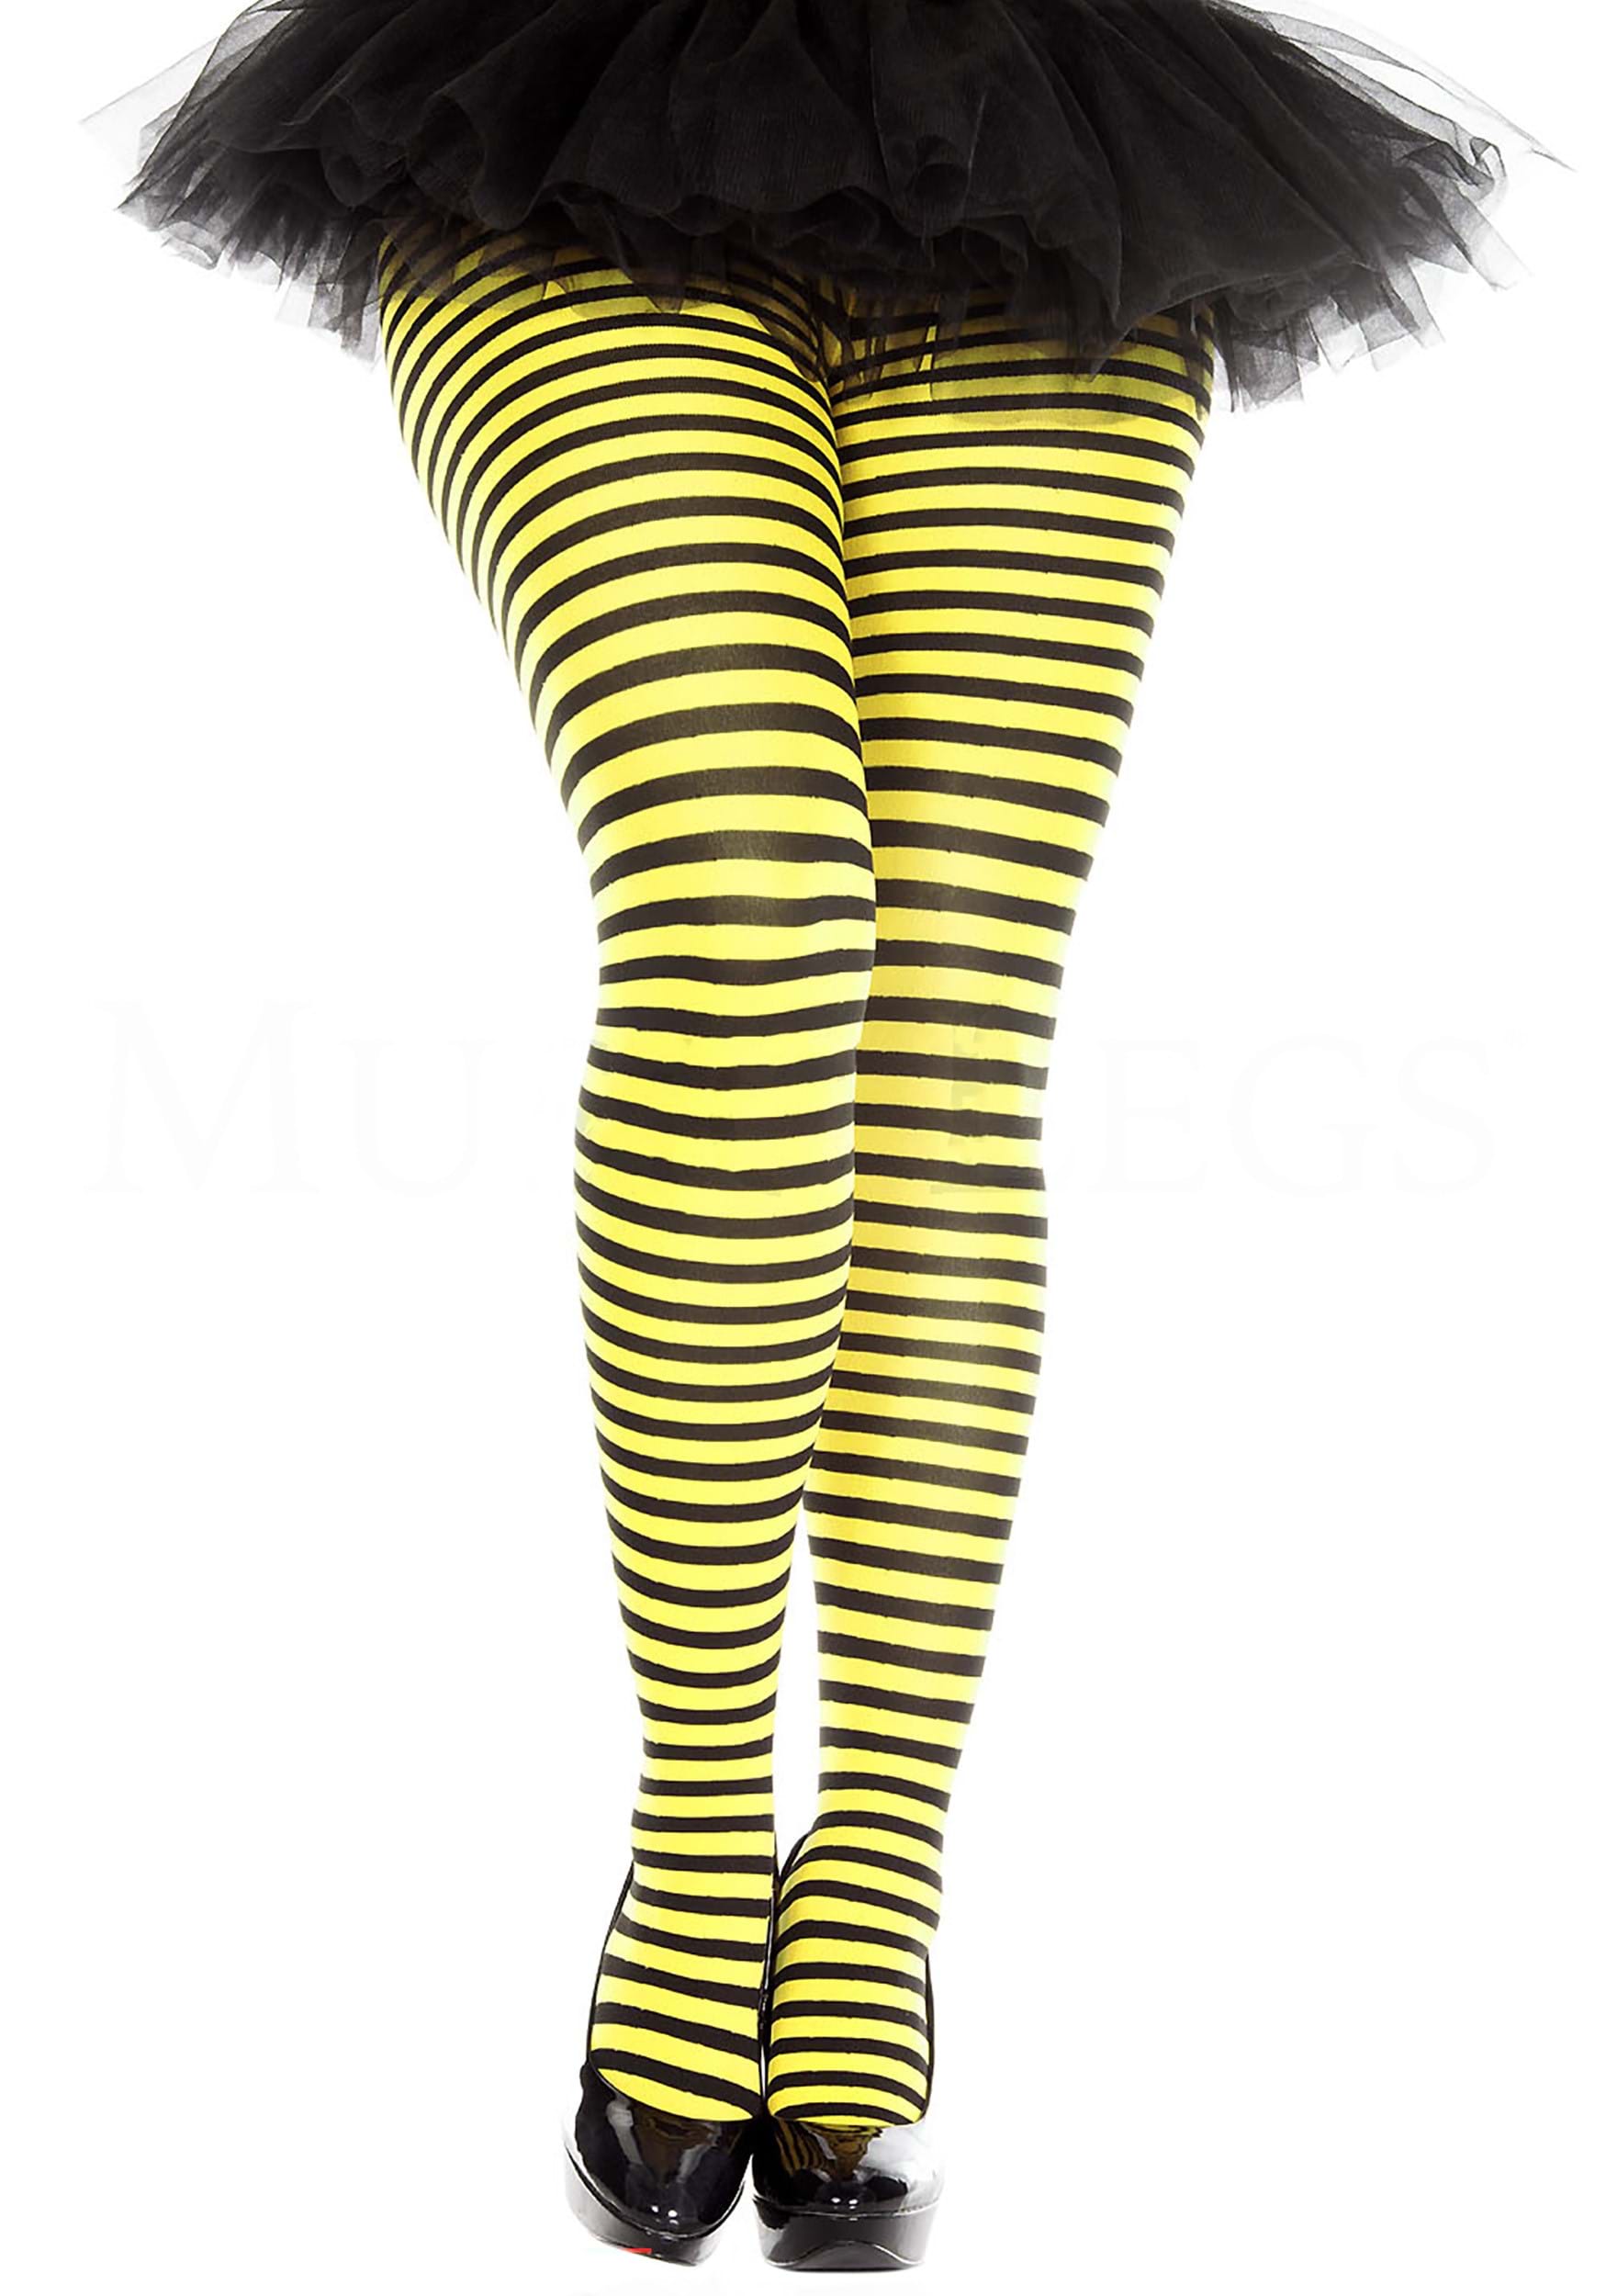 https://images.halloweencostumes.ca/products/93394/1-1/womens-plus-black-and-yellow-stripe-tights.jpg